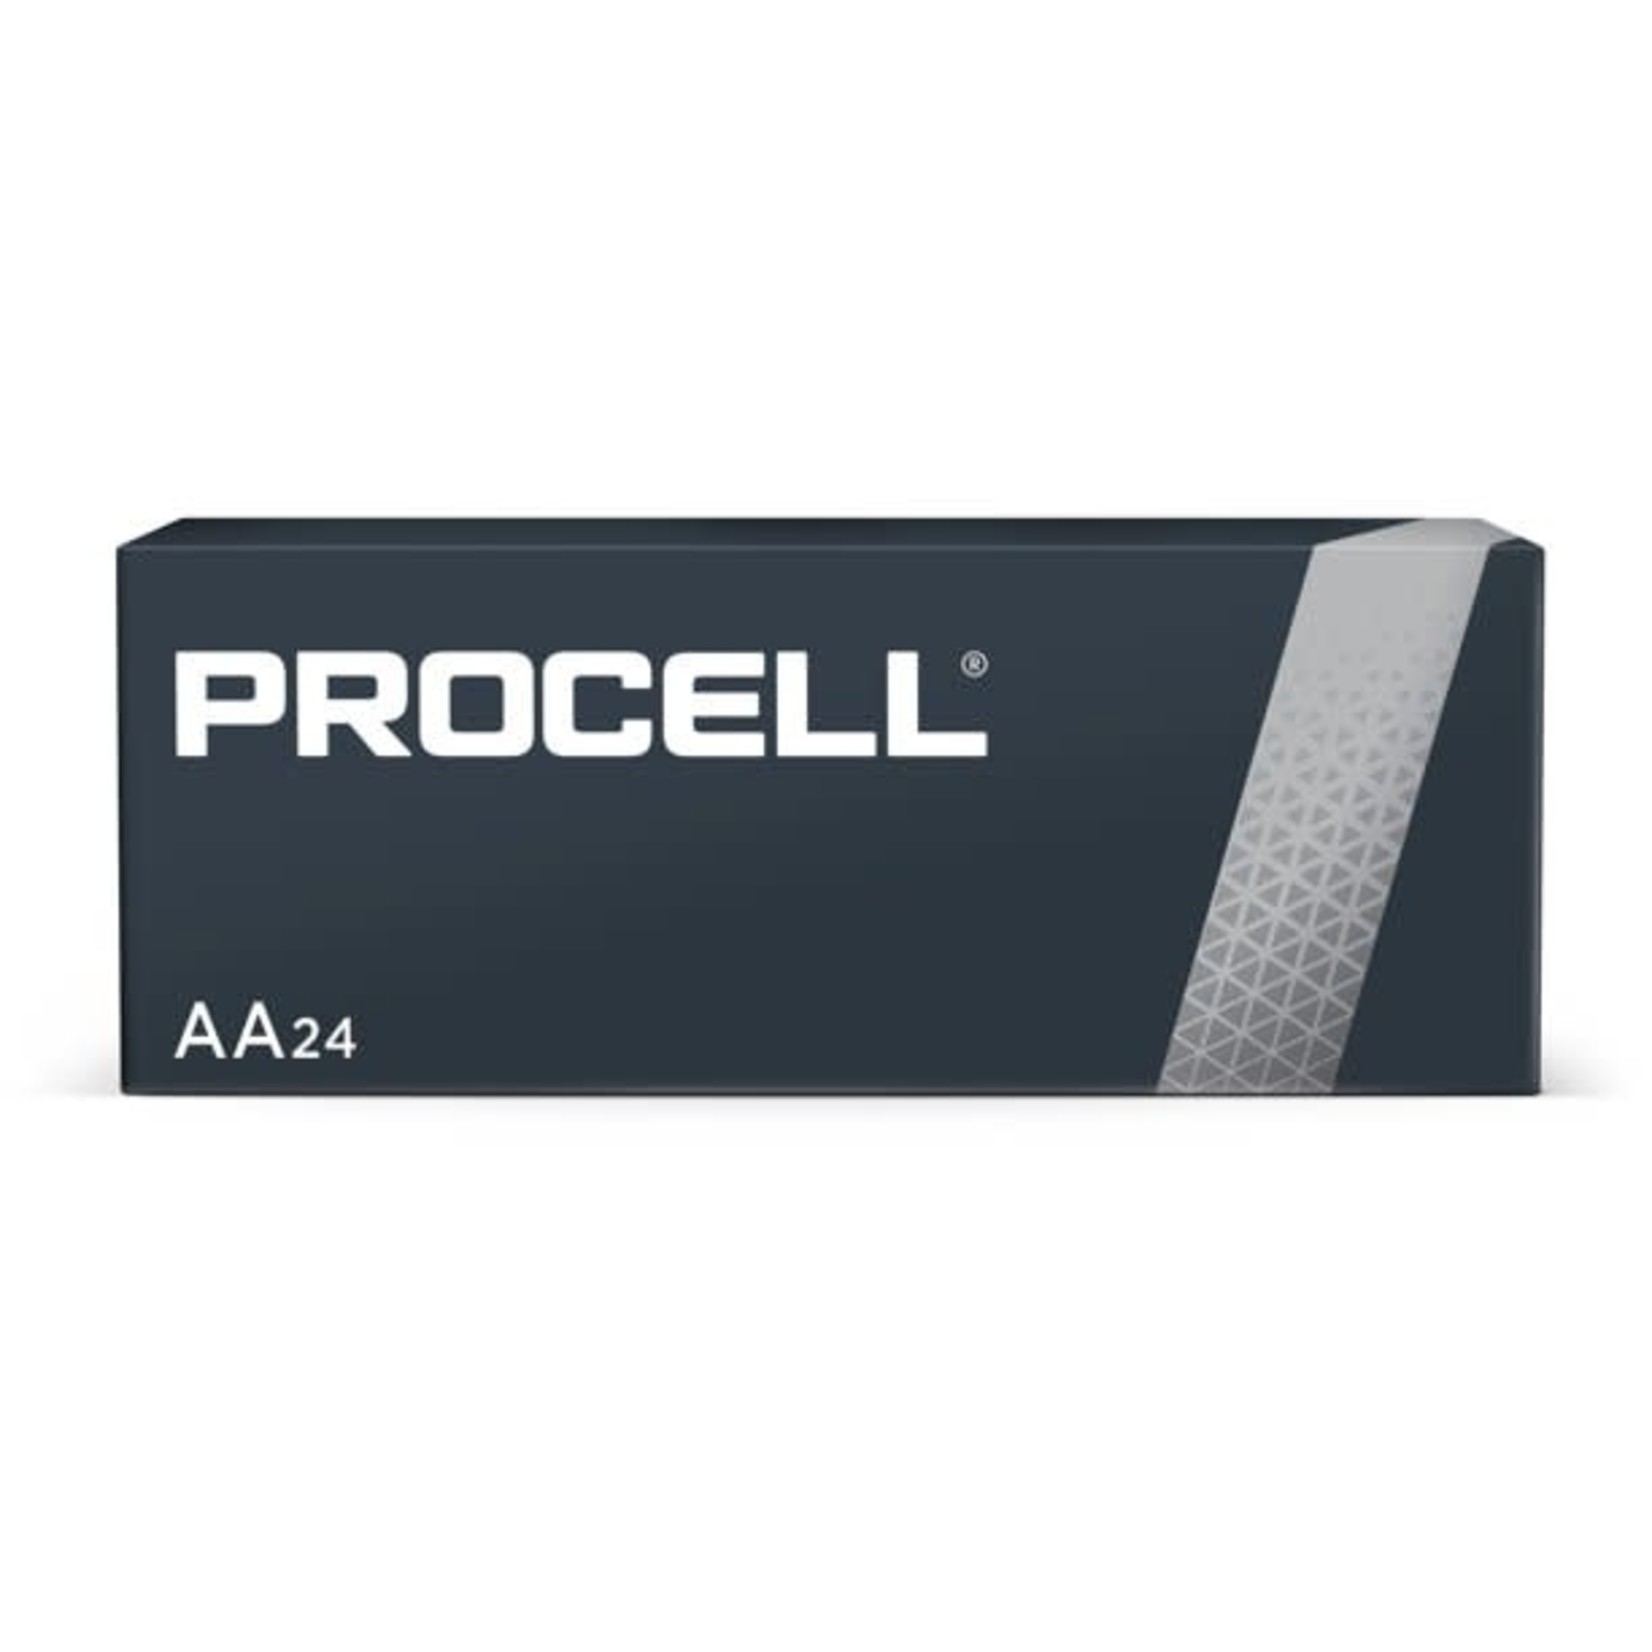 Procell Battery, Non-Rechargeable Alkaline, 1.5 V, AA, 24 Pack (243-PC1500BKD)